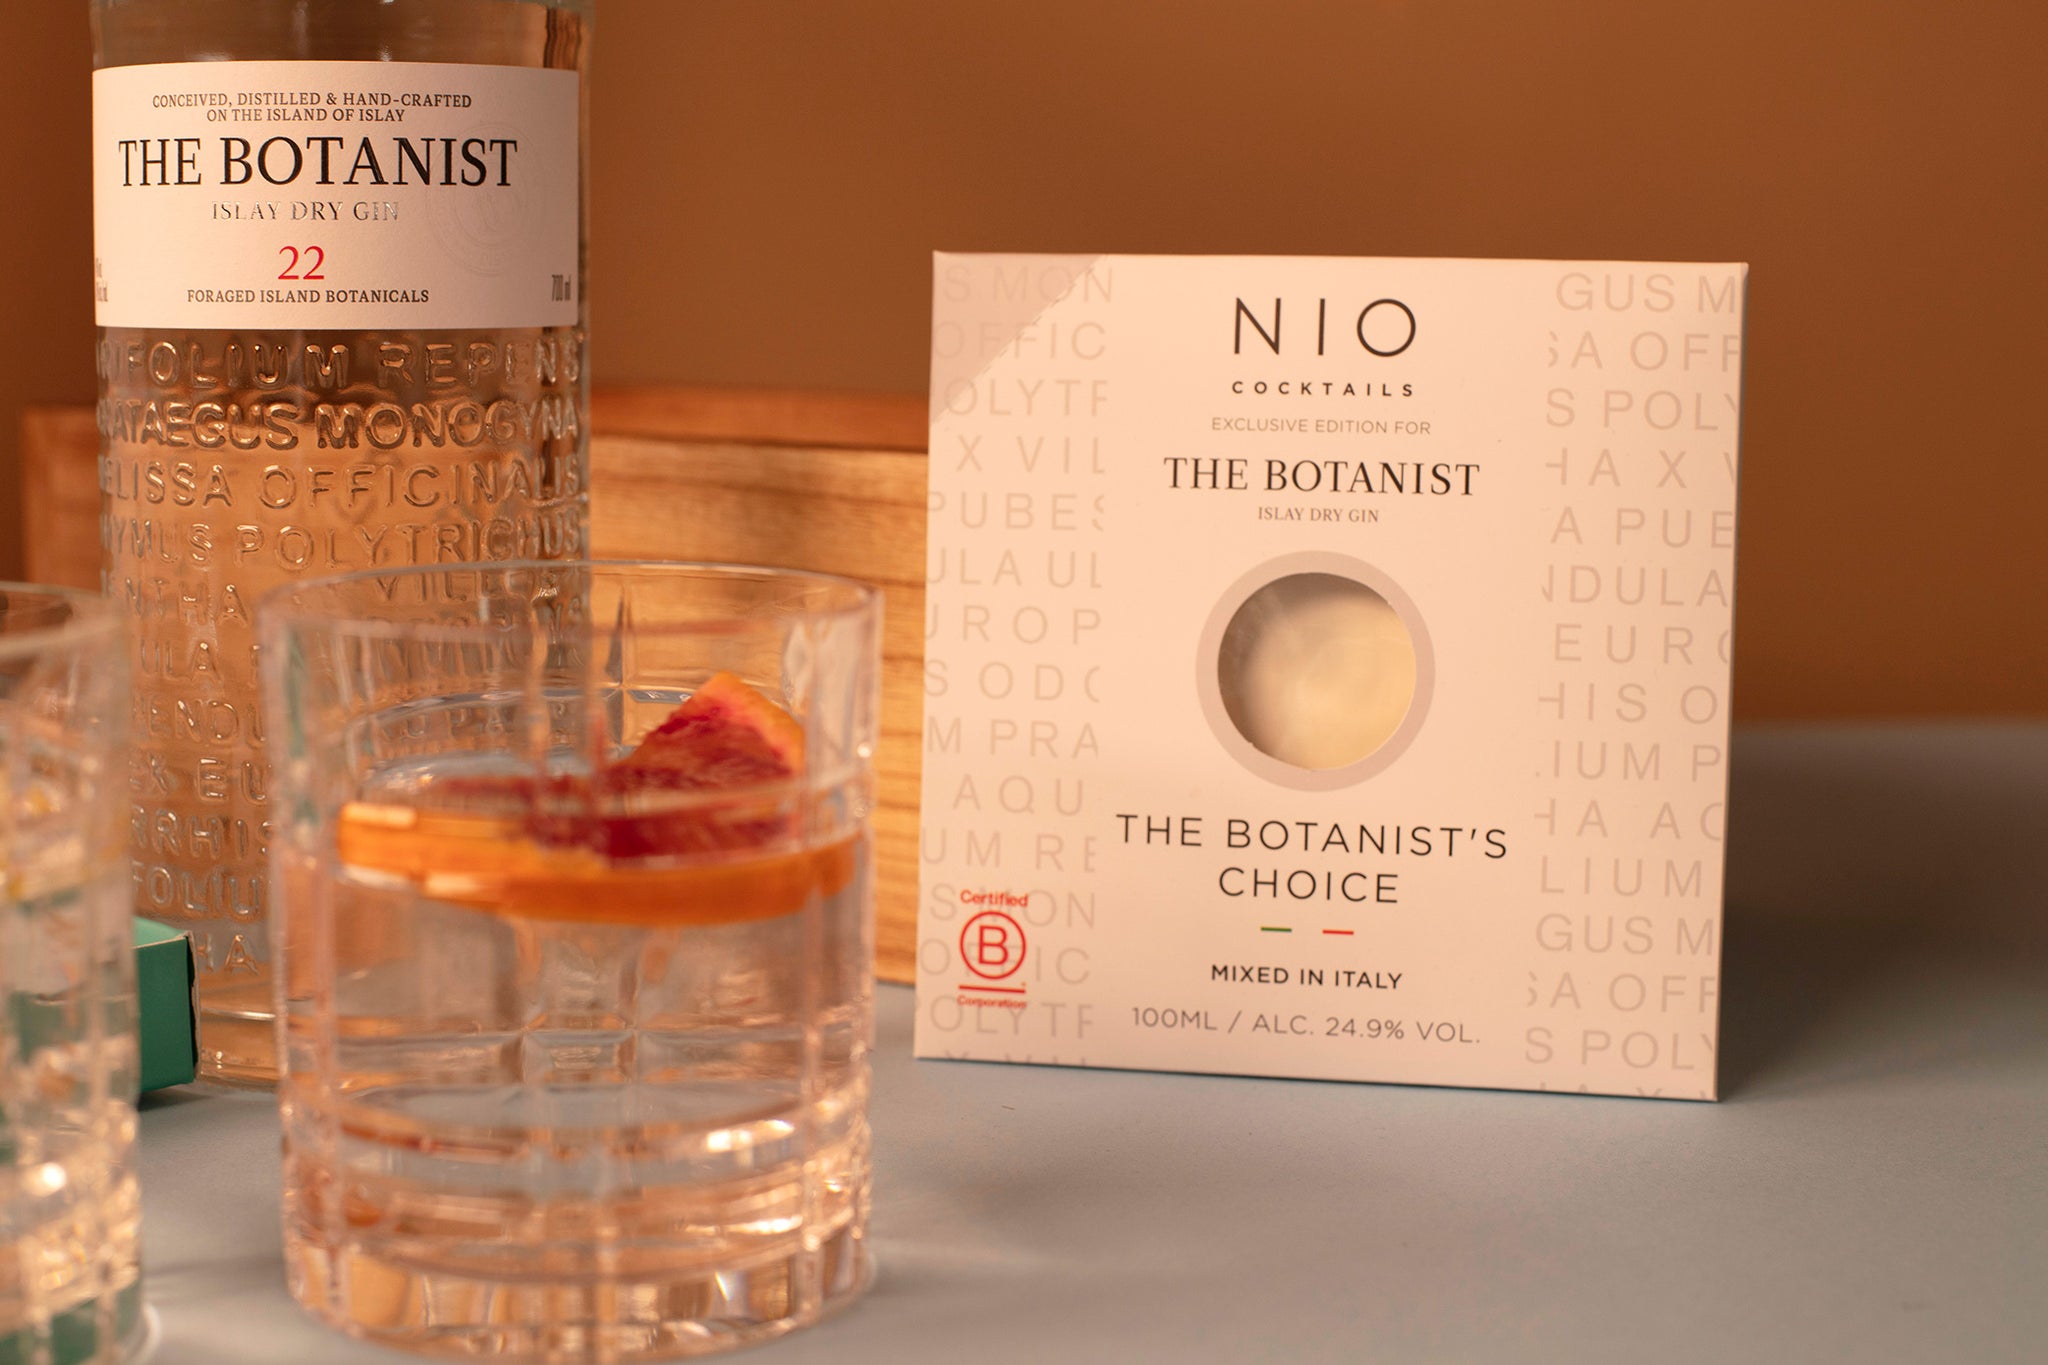 Which is the Right Type of Cocktail Glass to Use? – NIO Cocktails (UK)